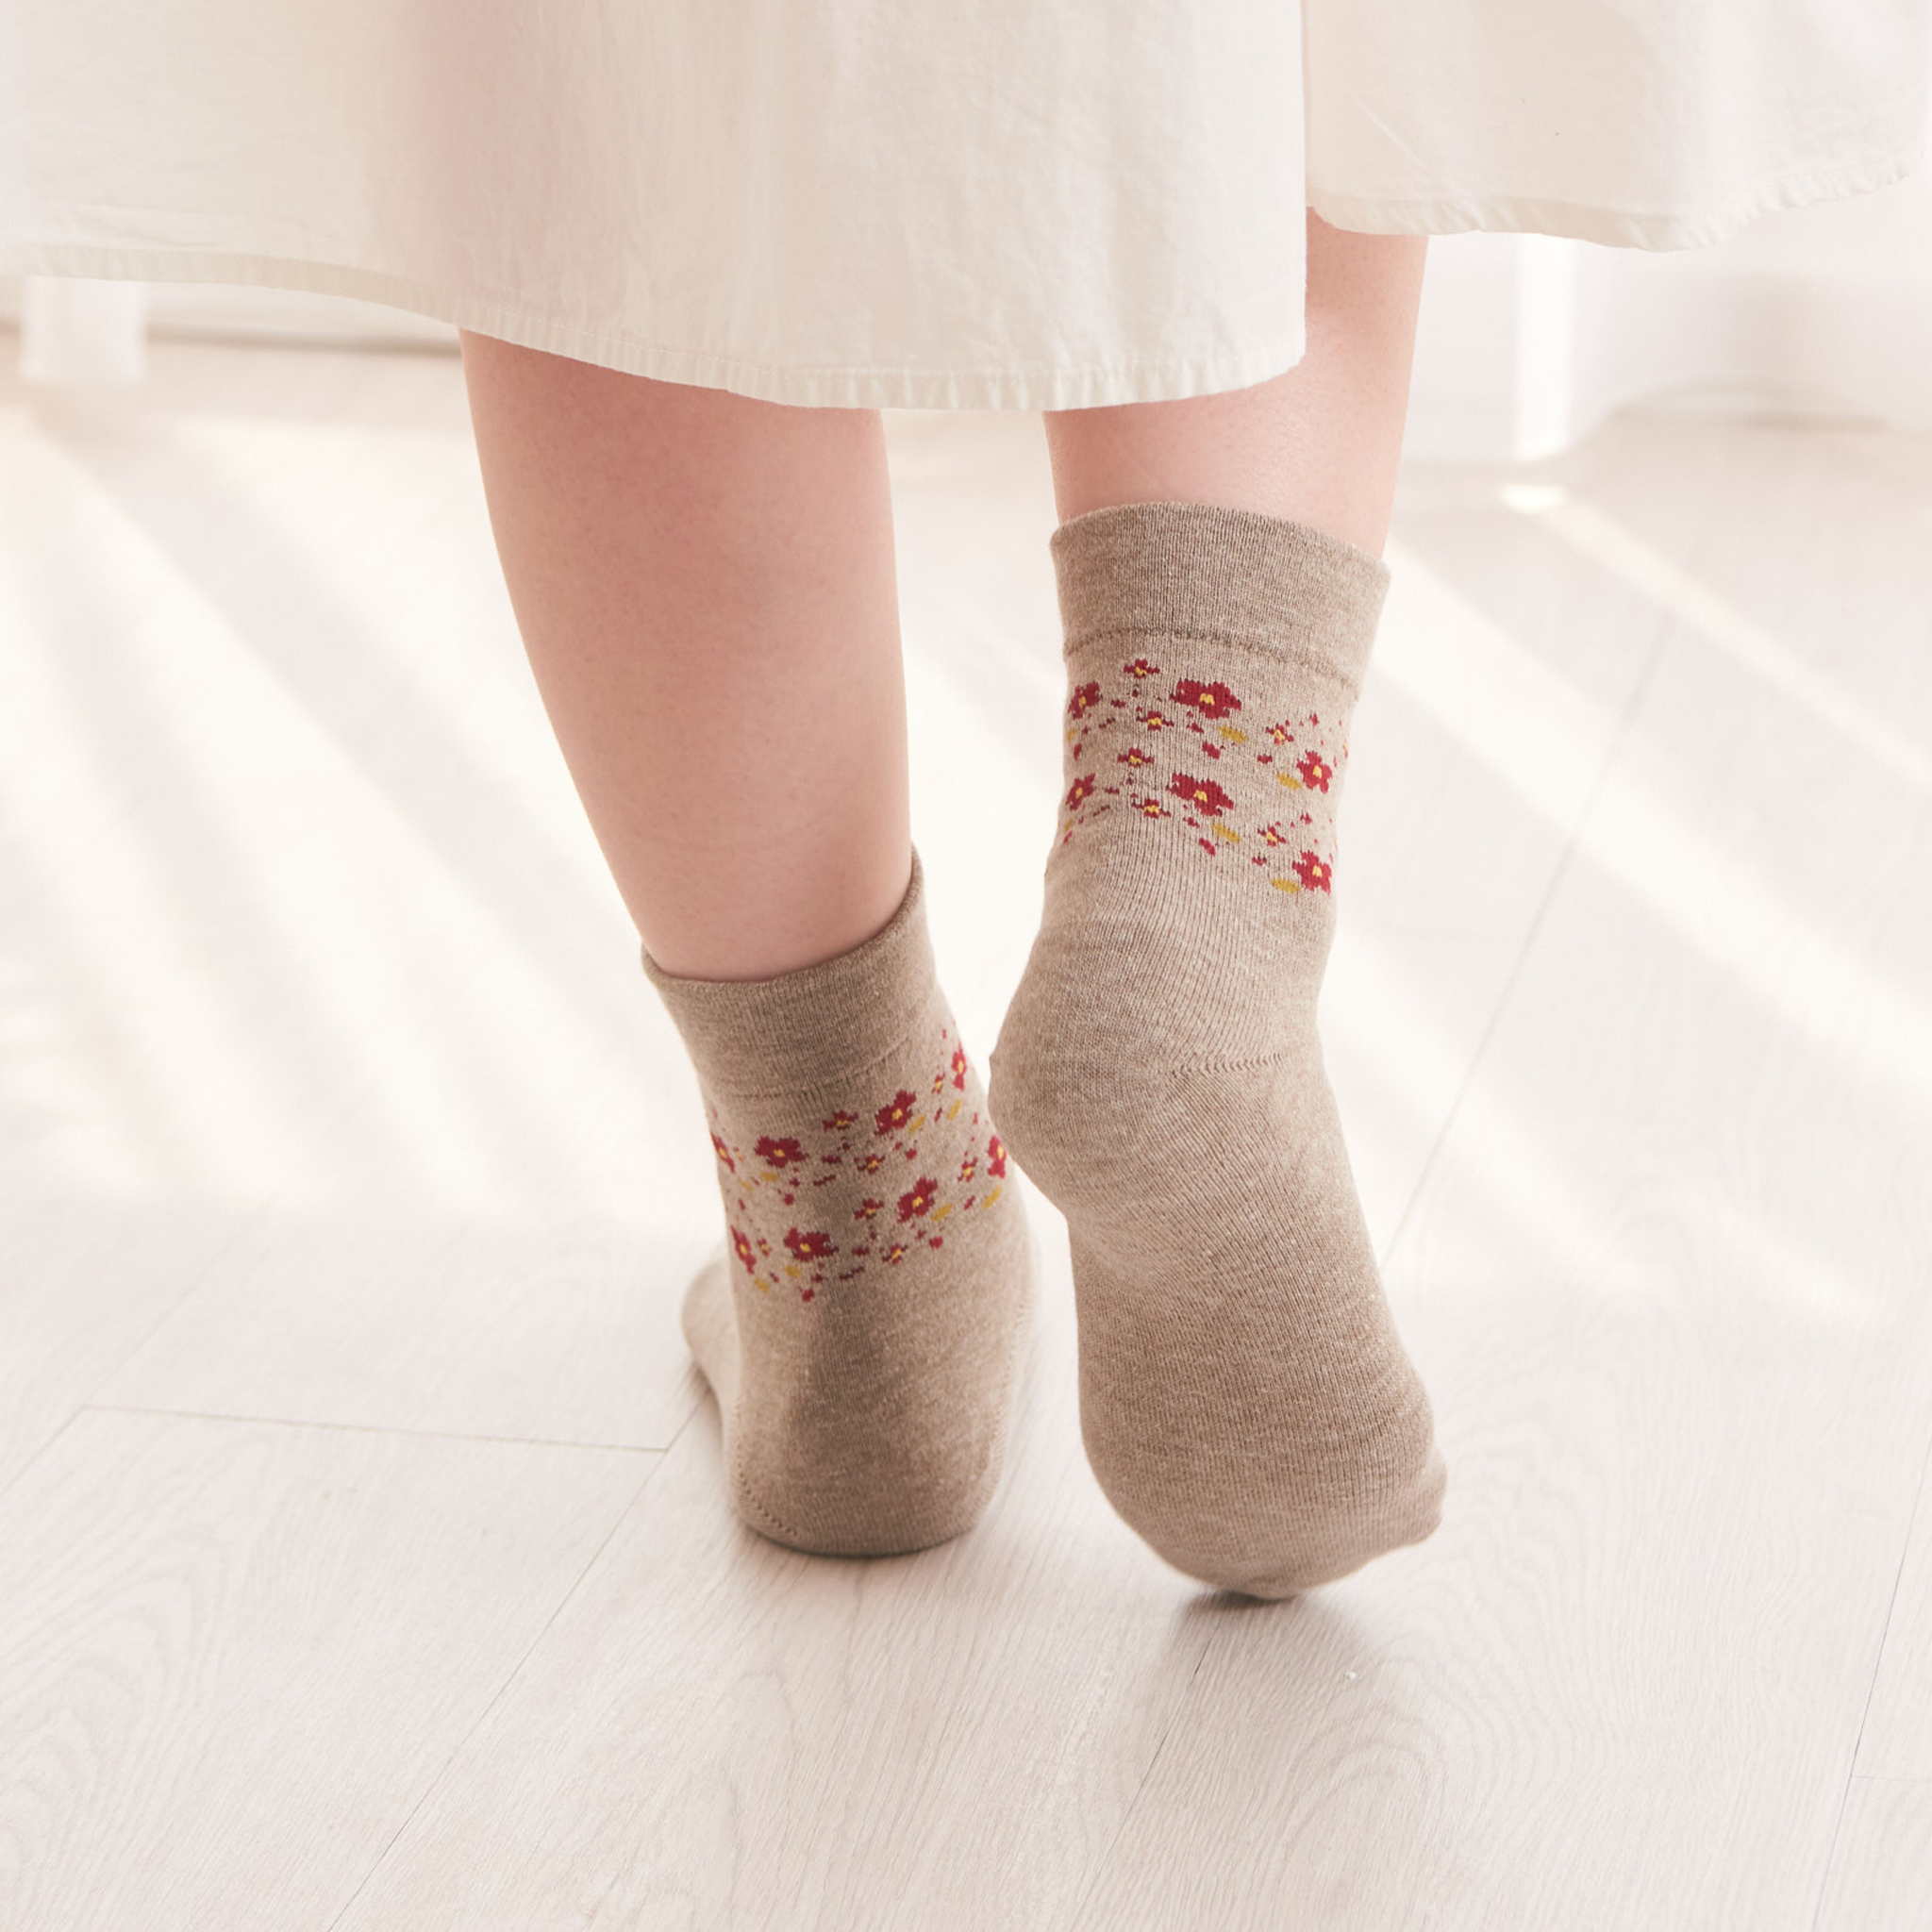 Smooth-heel socks double-layer wool blend [Flowers around ankle] - 663